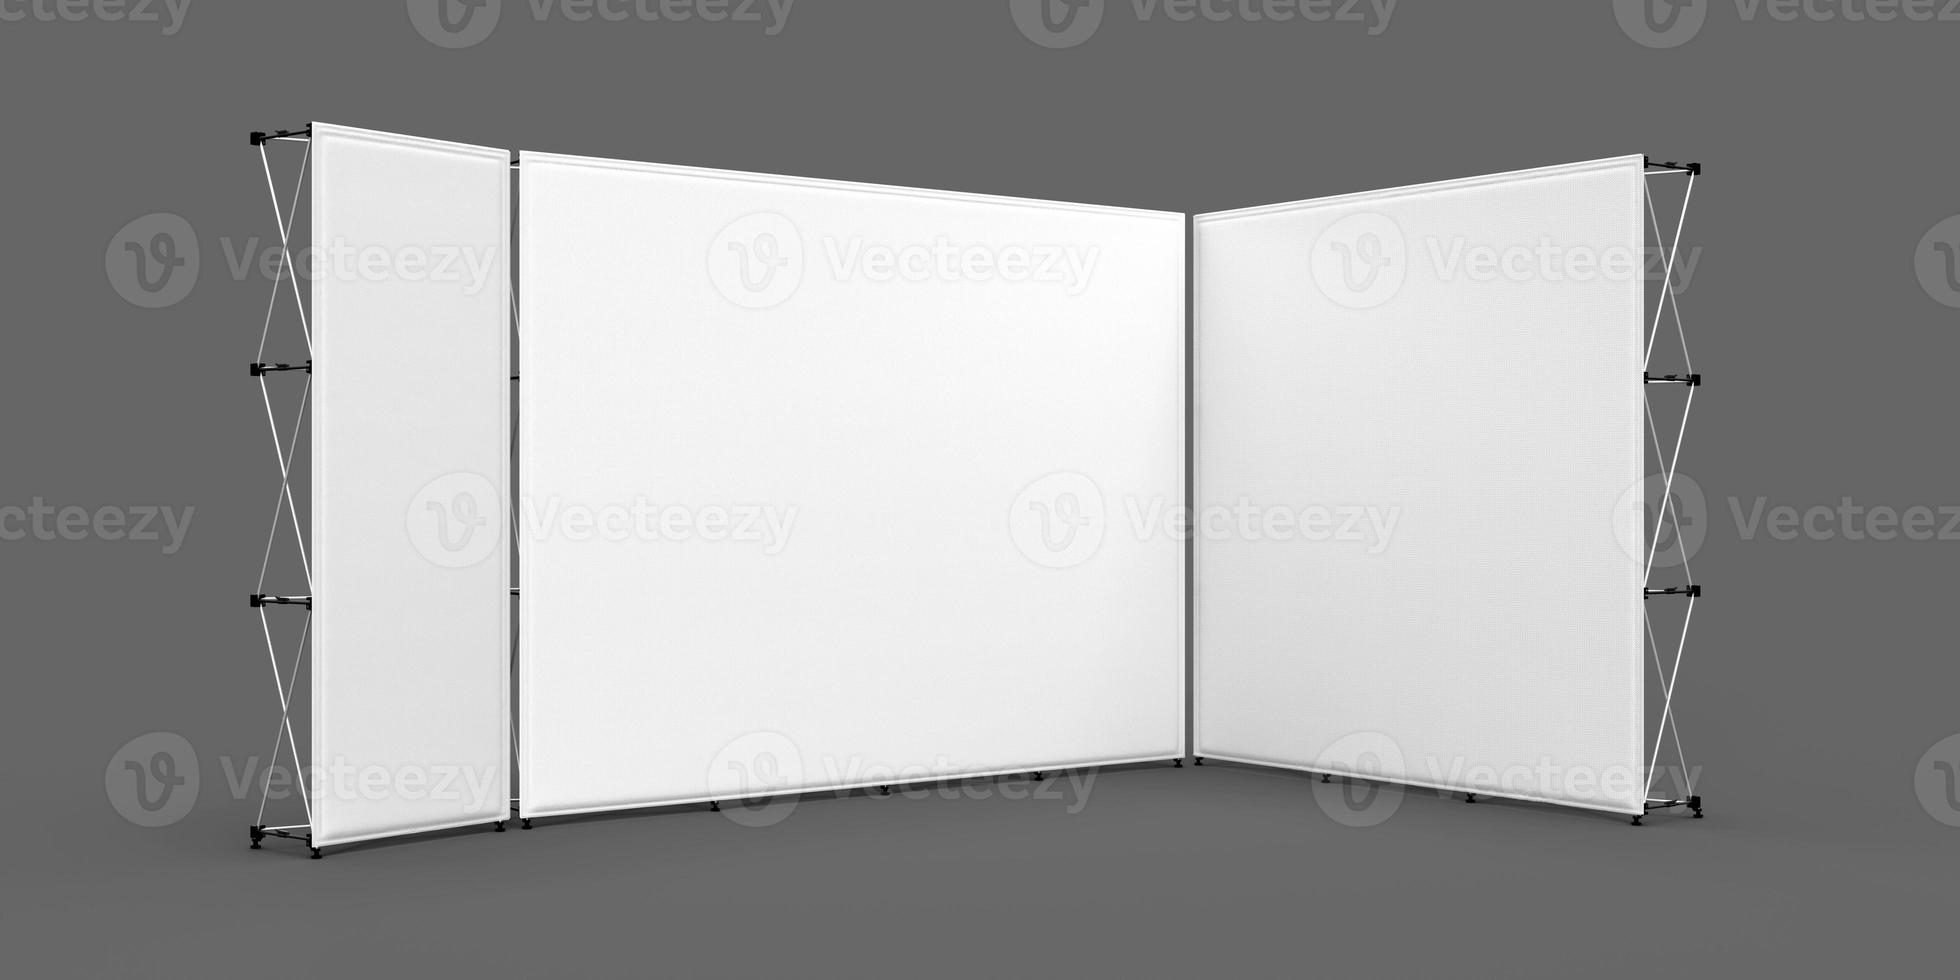 Exhibition Wall Banner Combo 3x1, 3x2 and 3x3 cubed systems, 3d render illustration. Isolated on a dark background photo